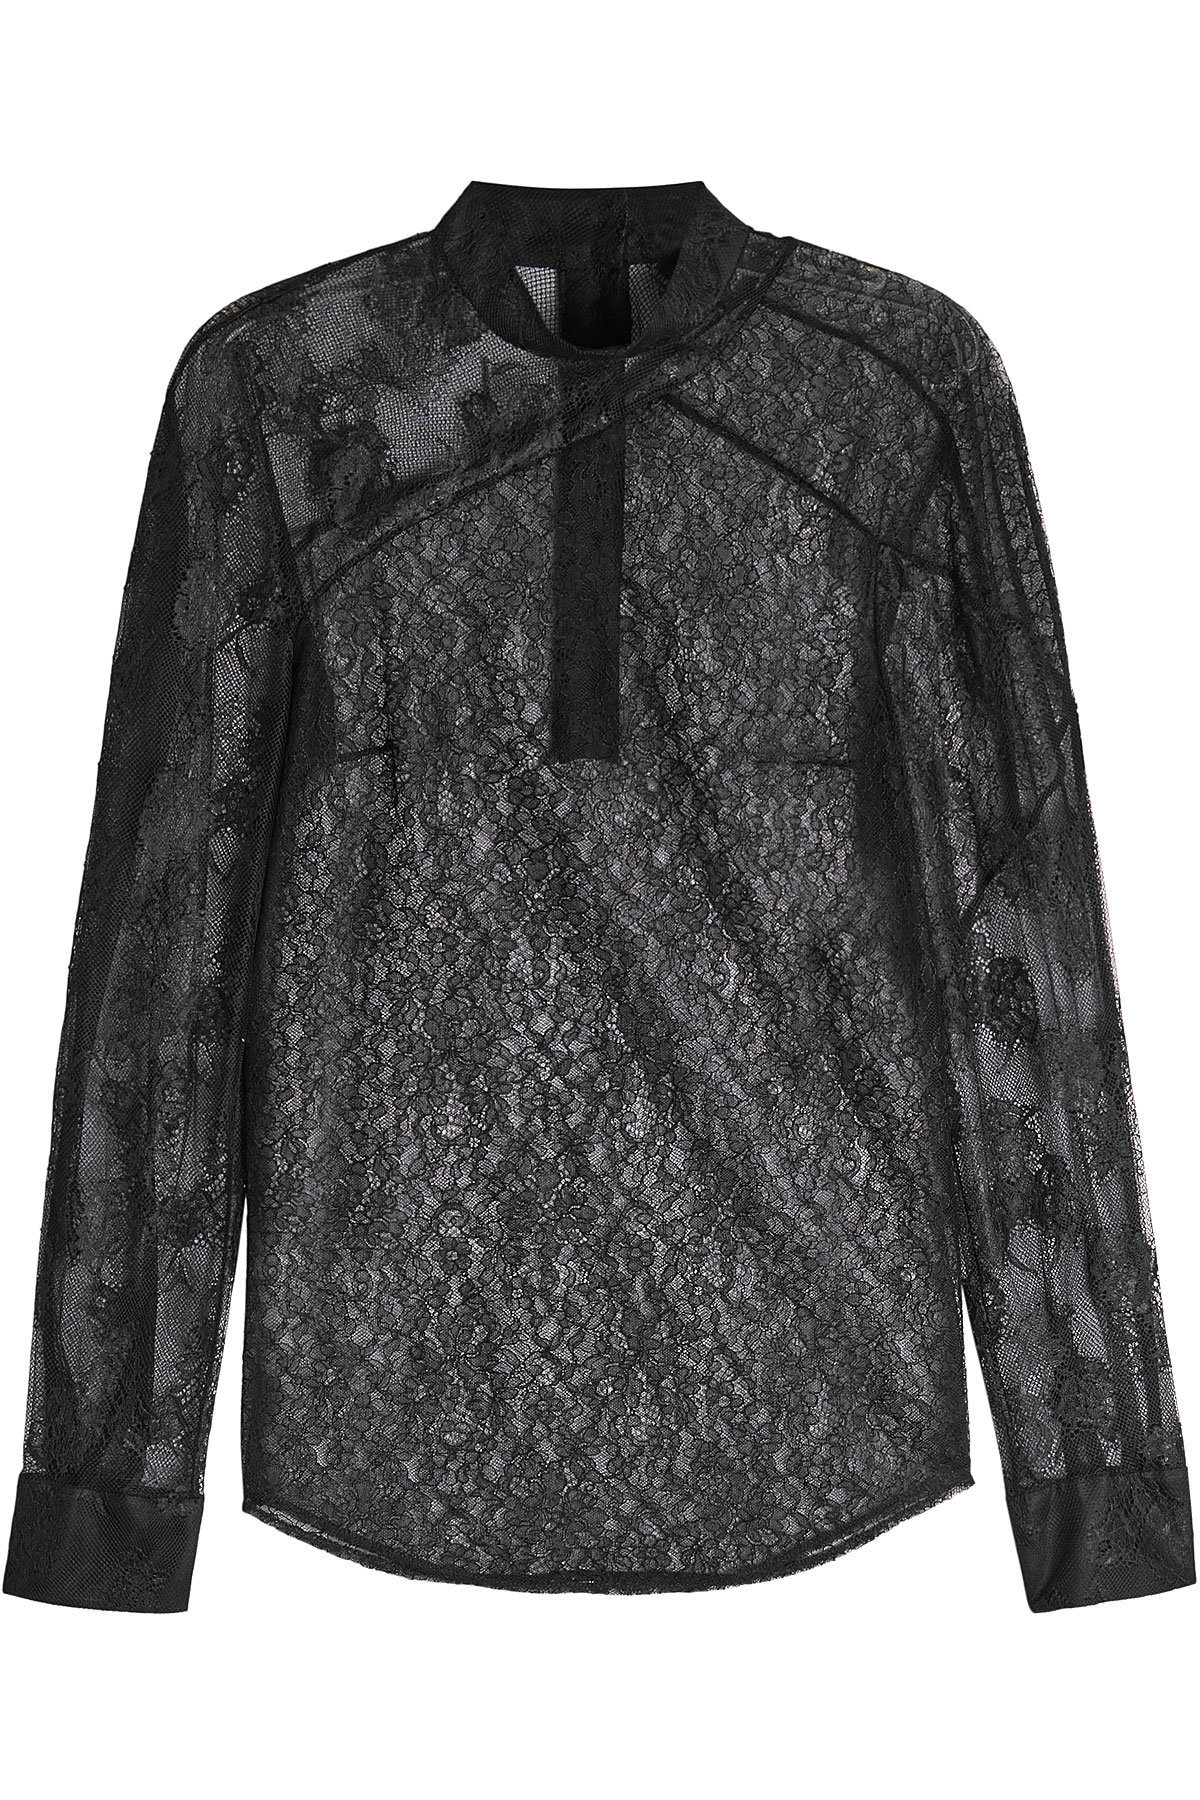 Patchwork Lace Shirt by Christopher Kane